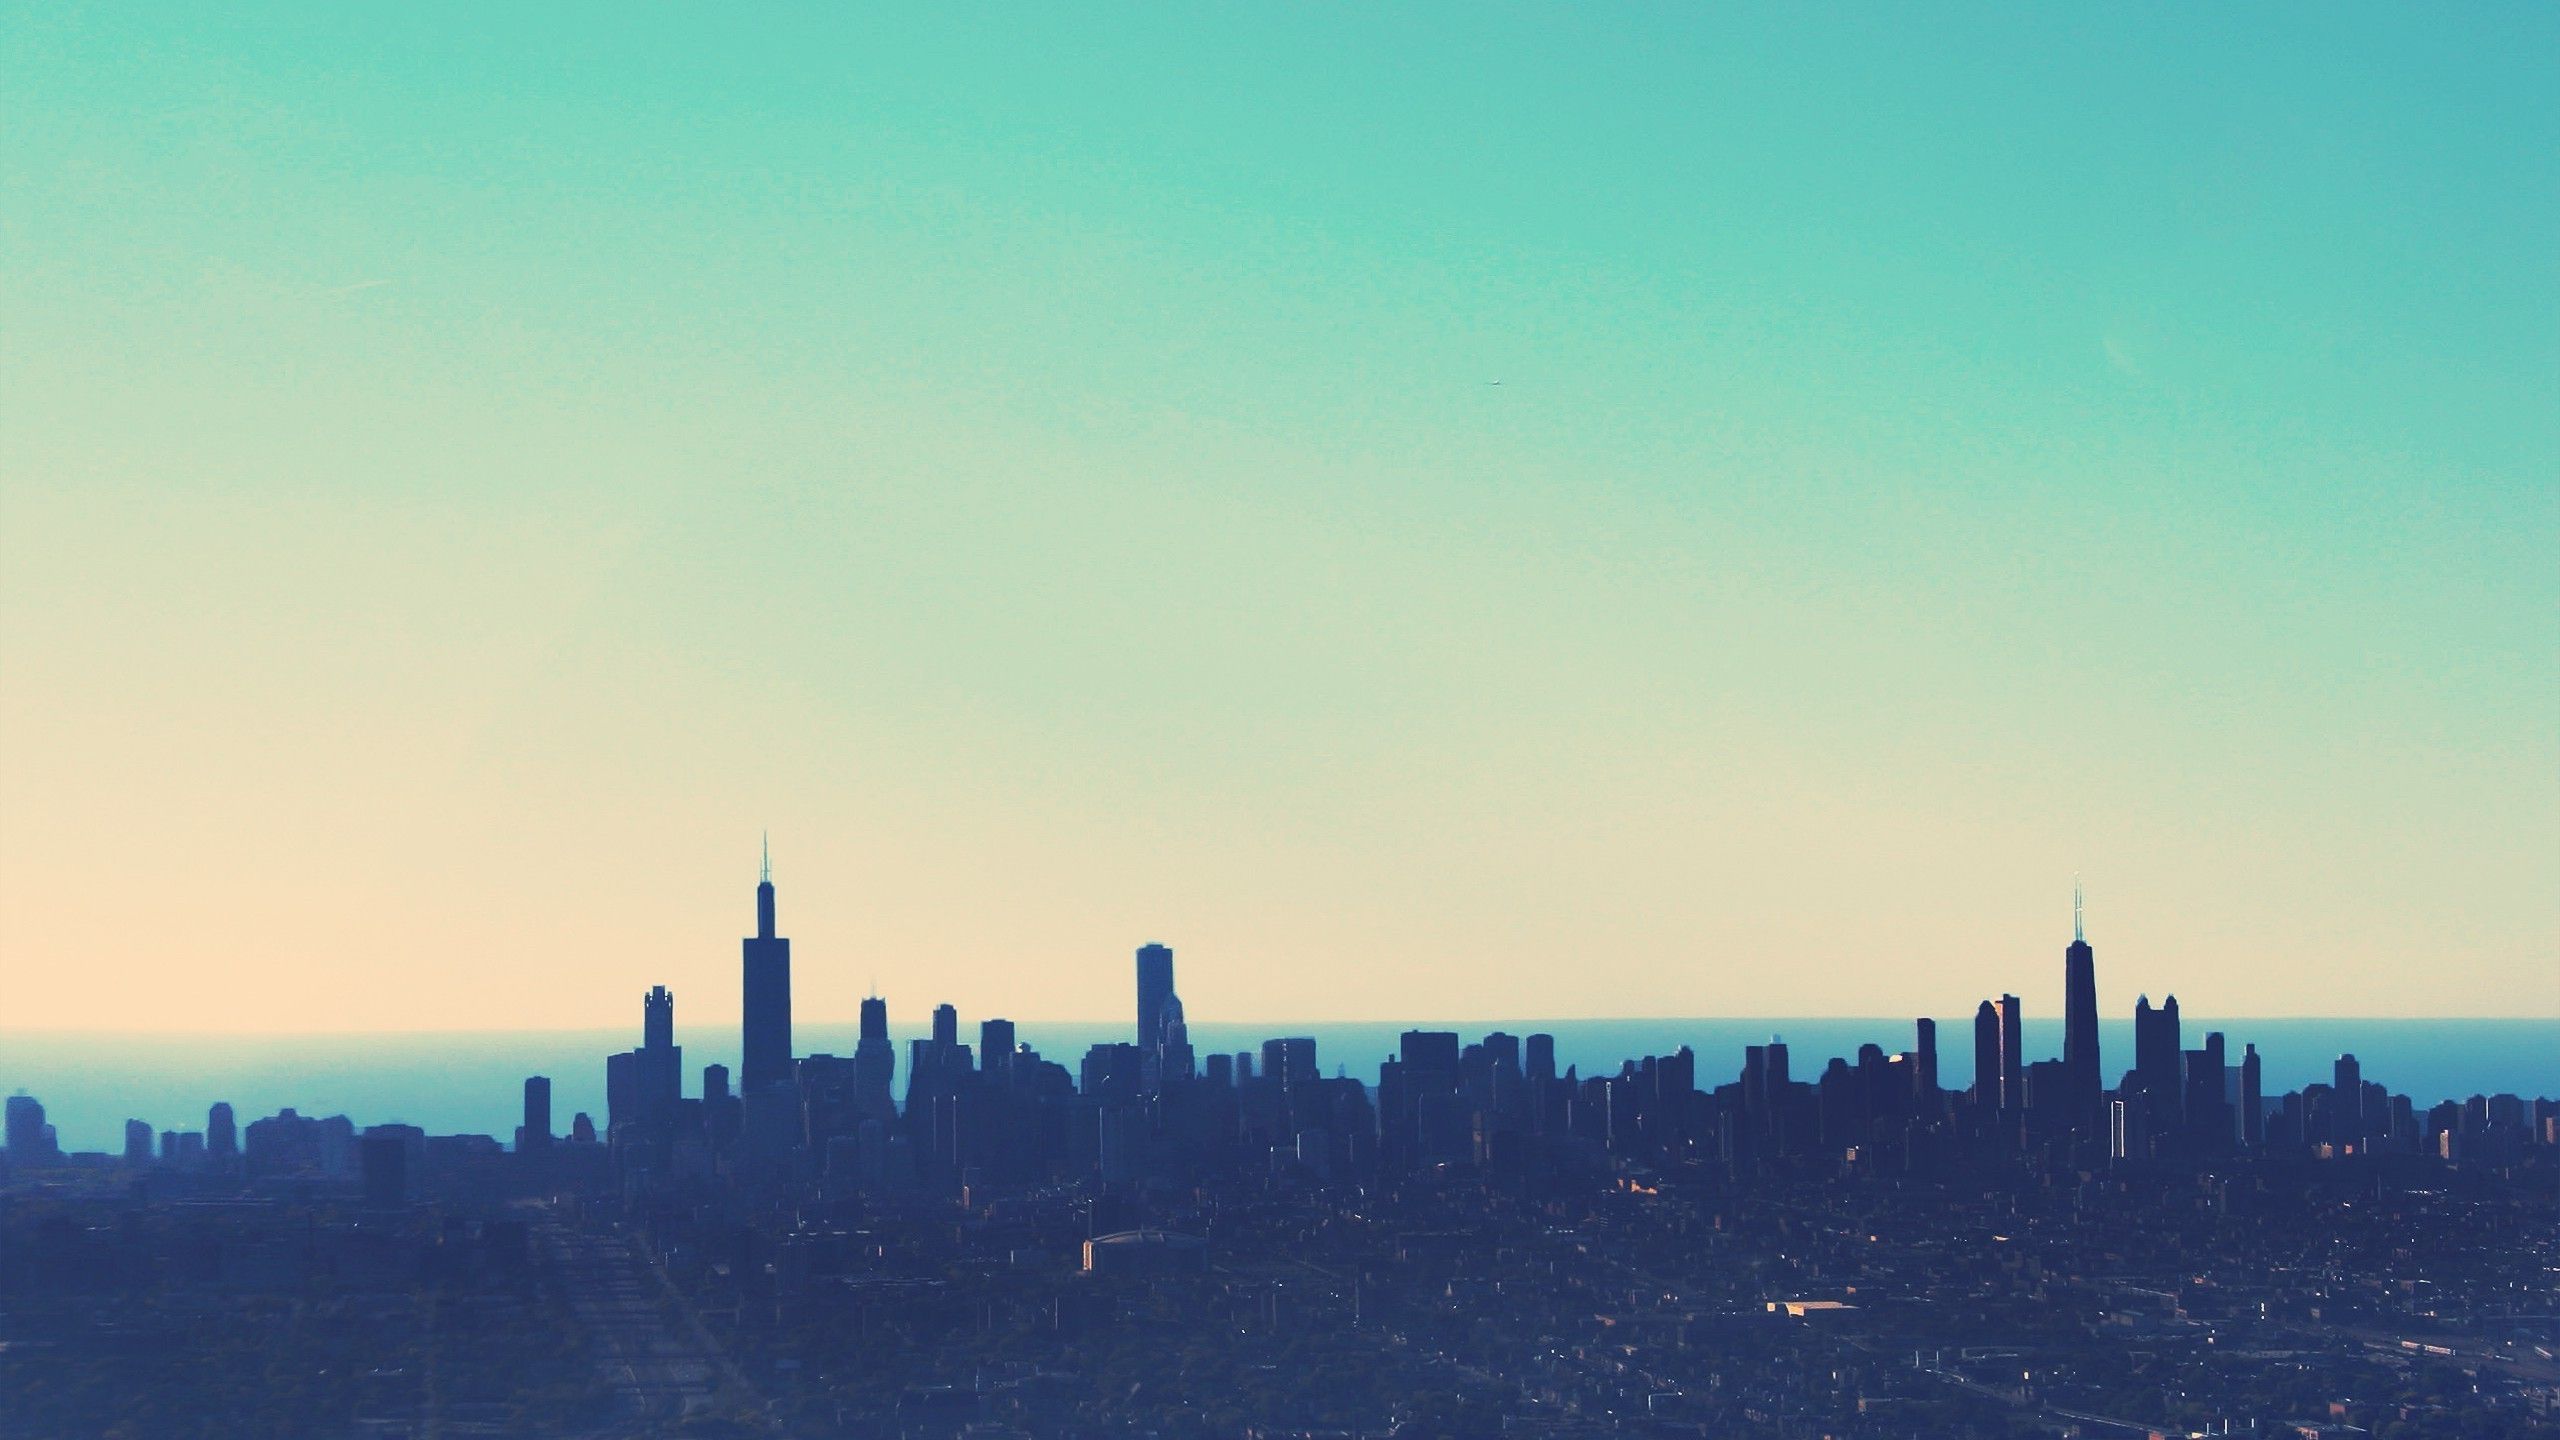 A photo of the Chicago skyline at sunset. - Turquoise, cityscape